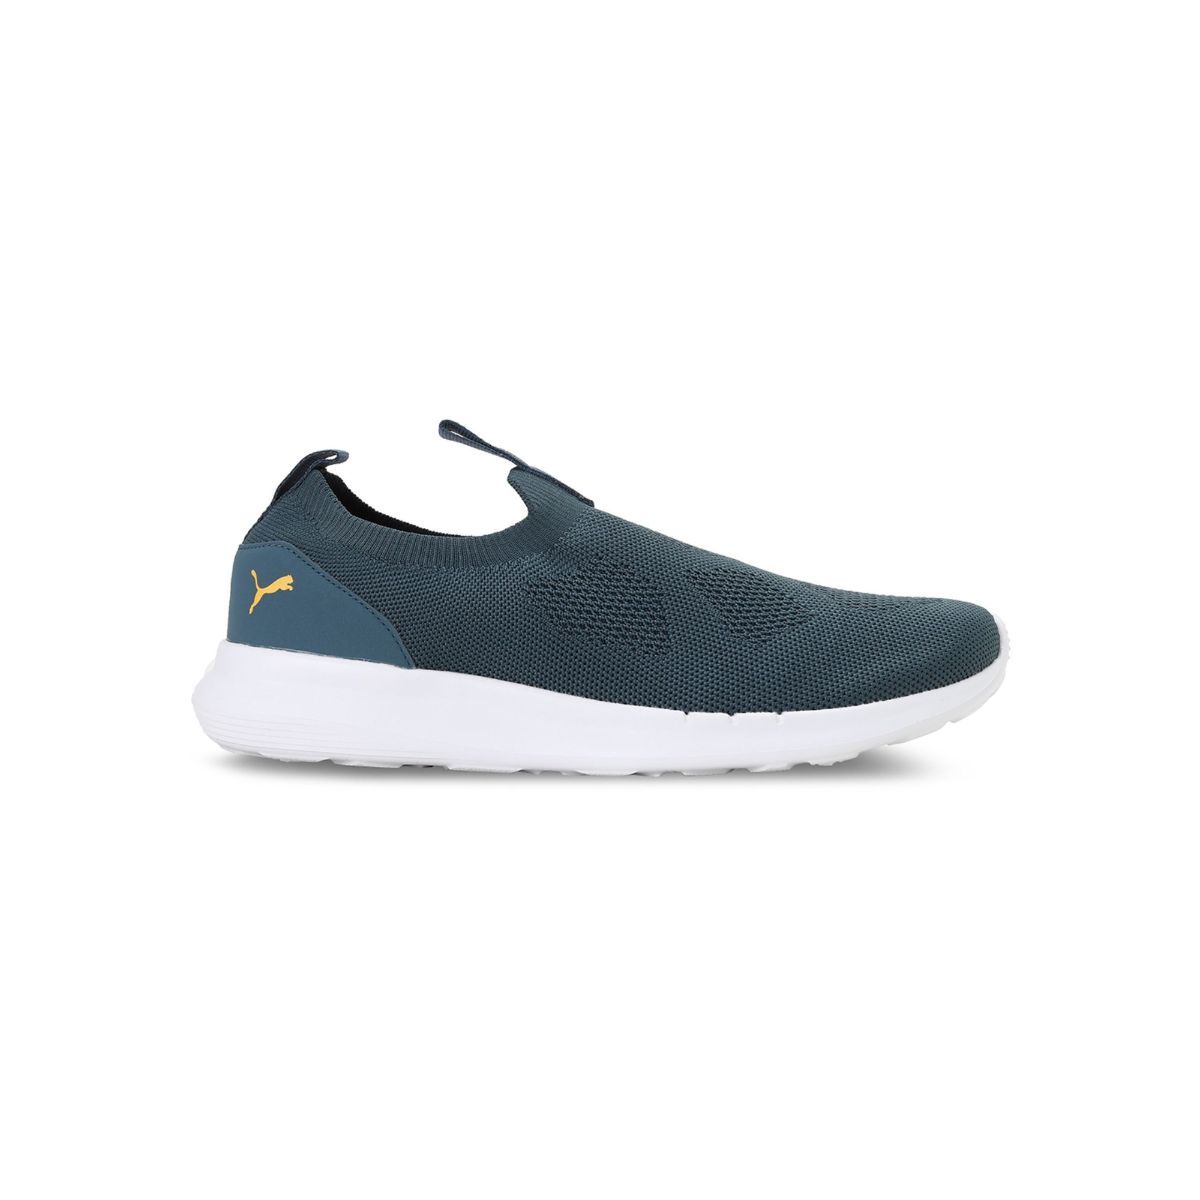 Buy Men Grey & Blue Riot Sports Shoes From Fancode Shop.